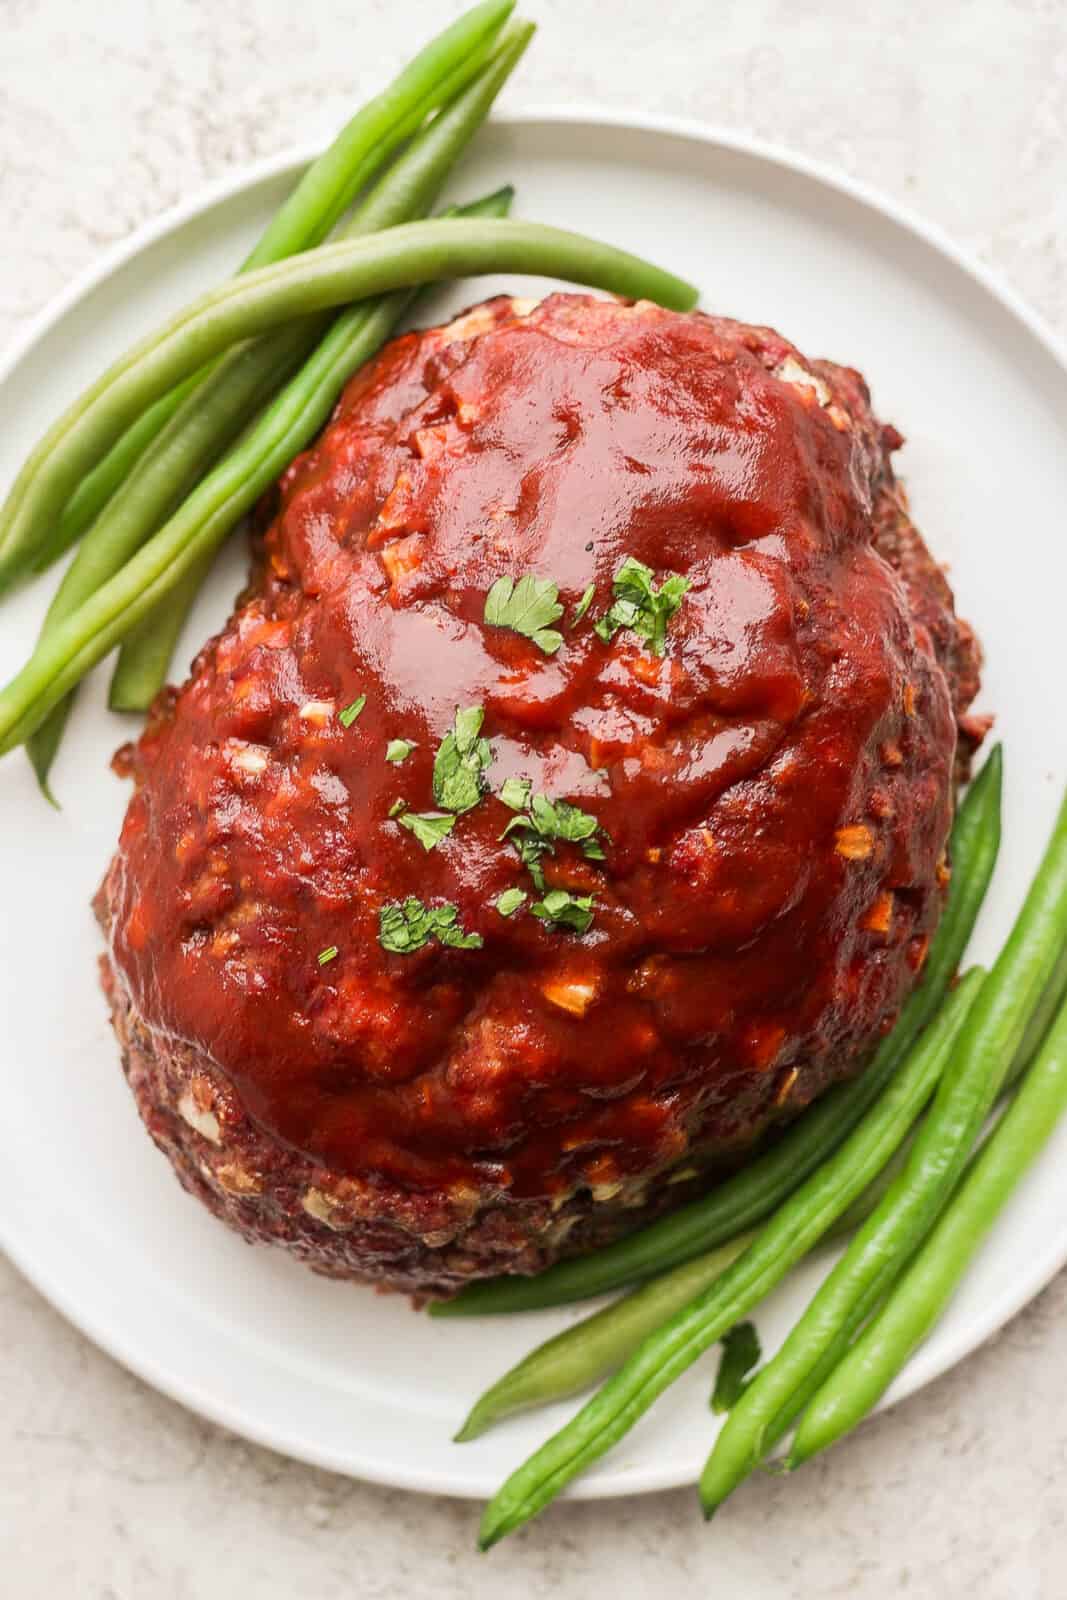 Top view of a smoked meatloaf on a plate with green beans on either side.